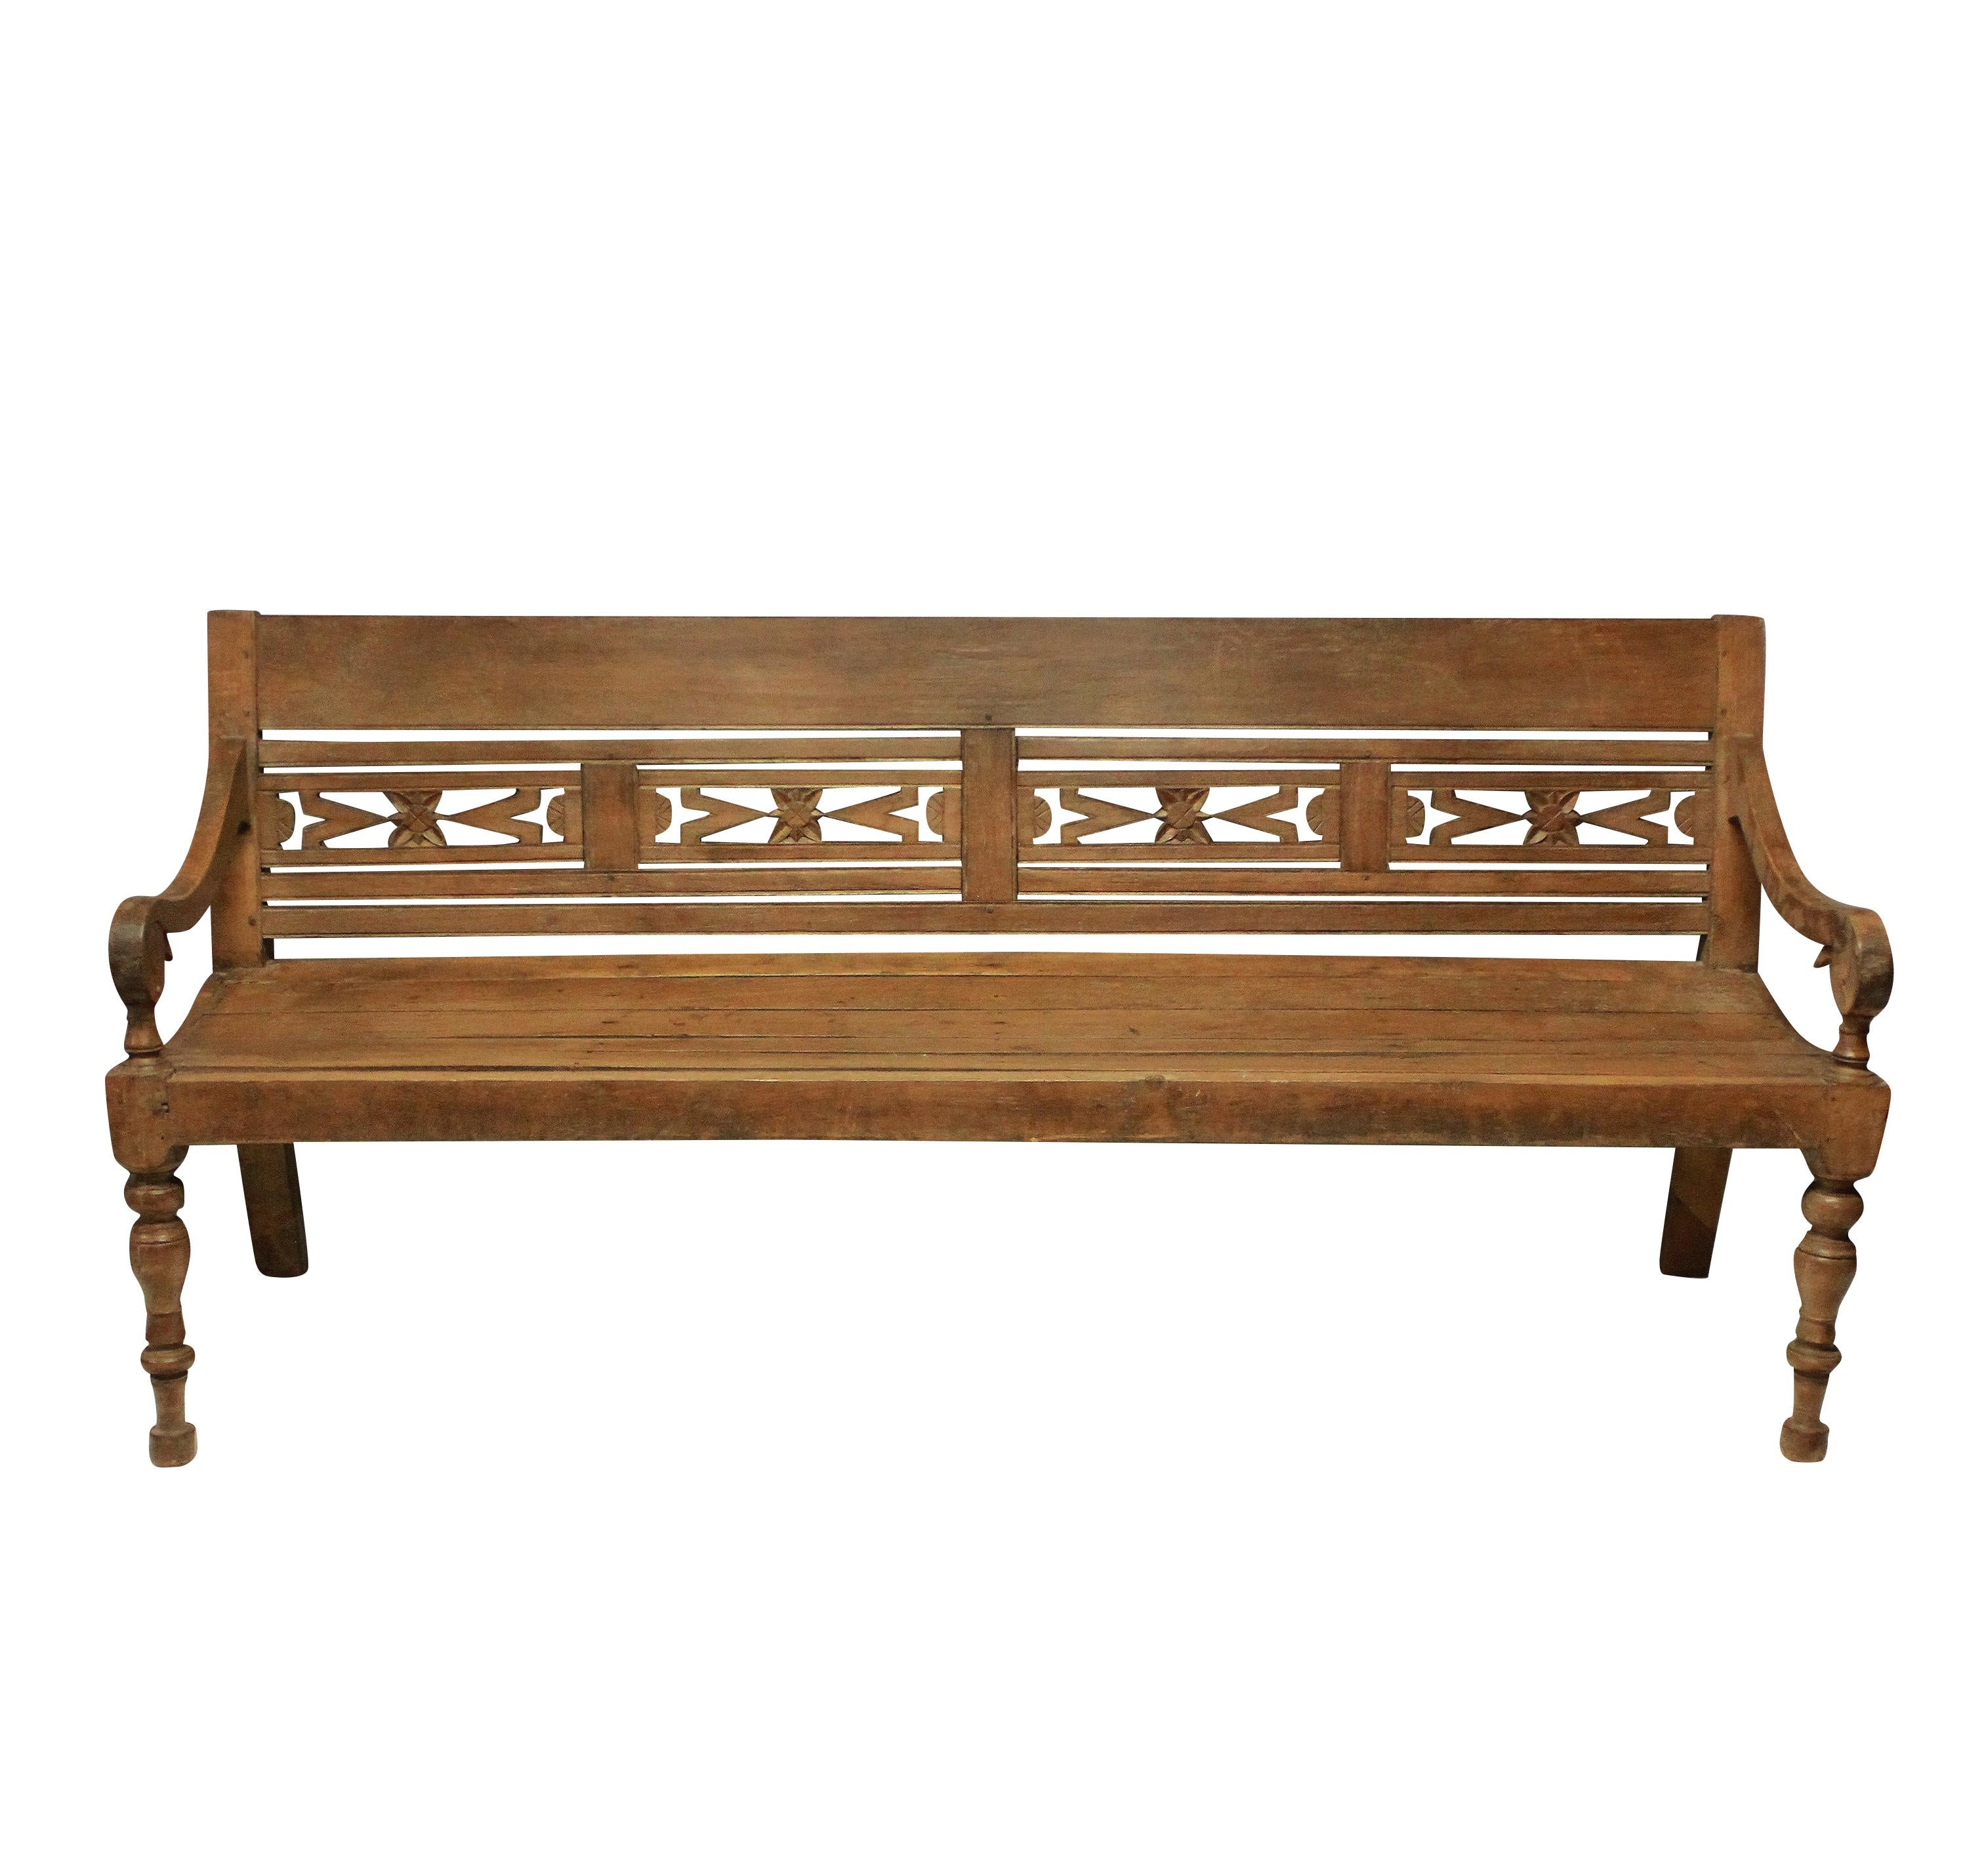 A large Anglo-Indian hall bench in carved teak.